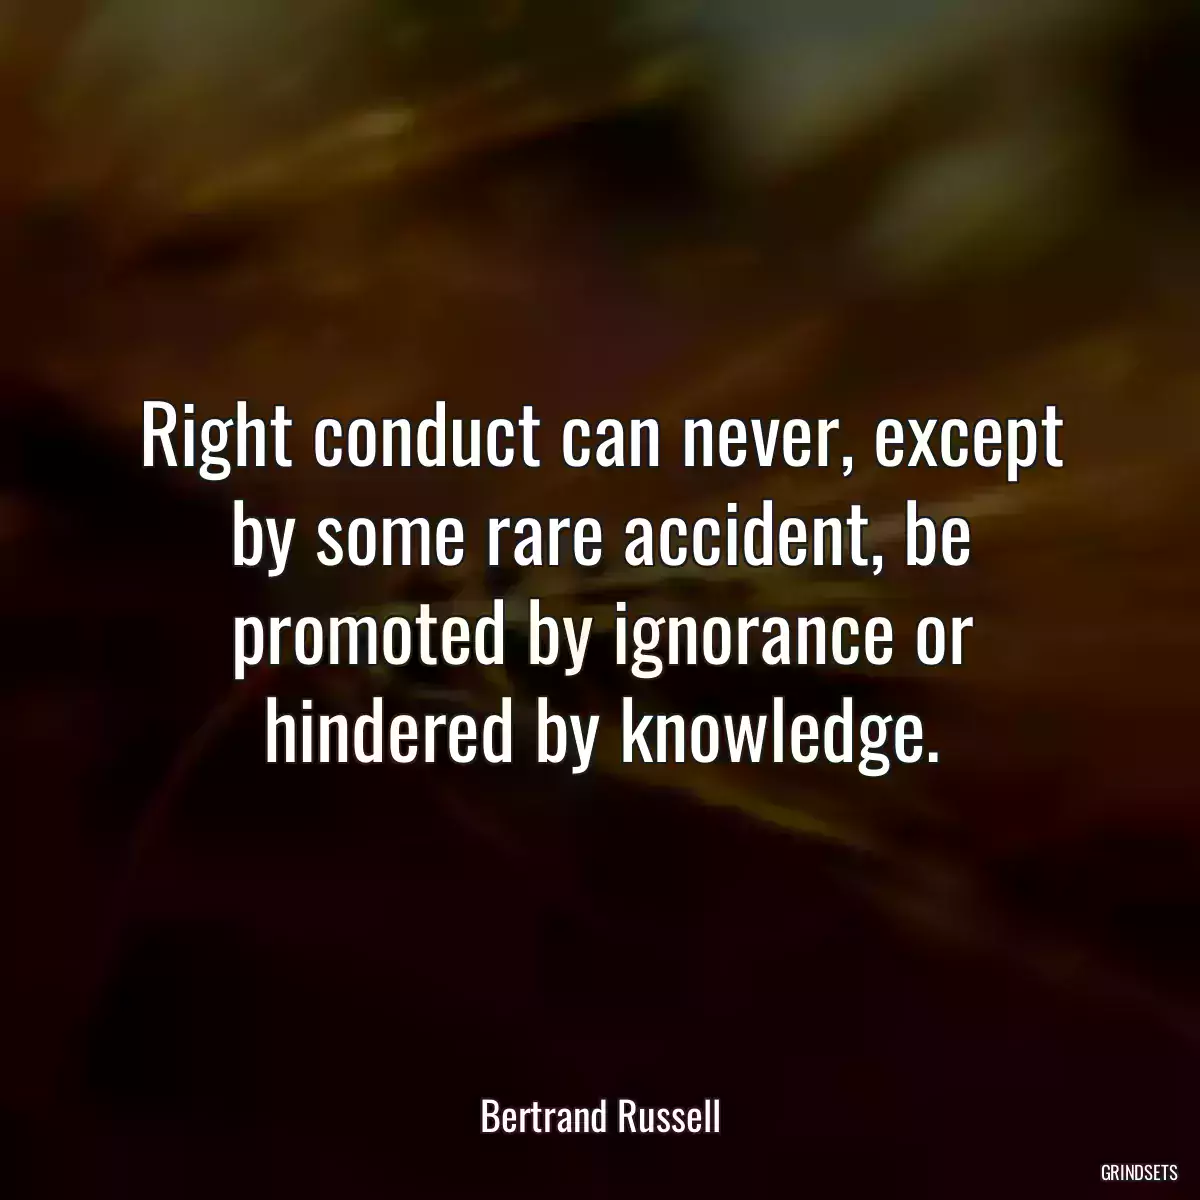 Right conduct can never, except by some rare accident, be promoted by ignorance or hindered by knowledge.